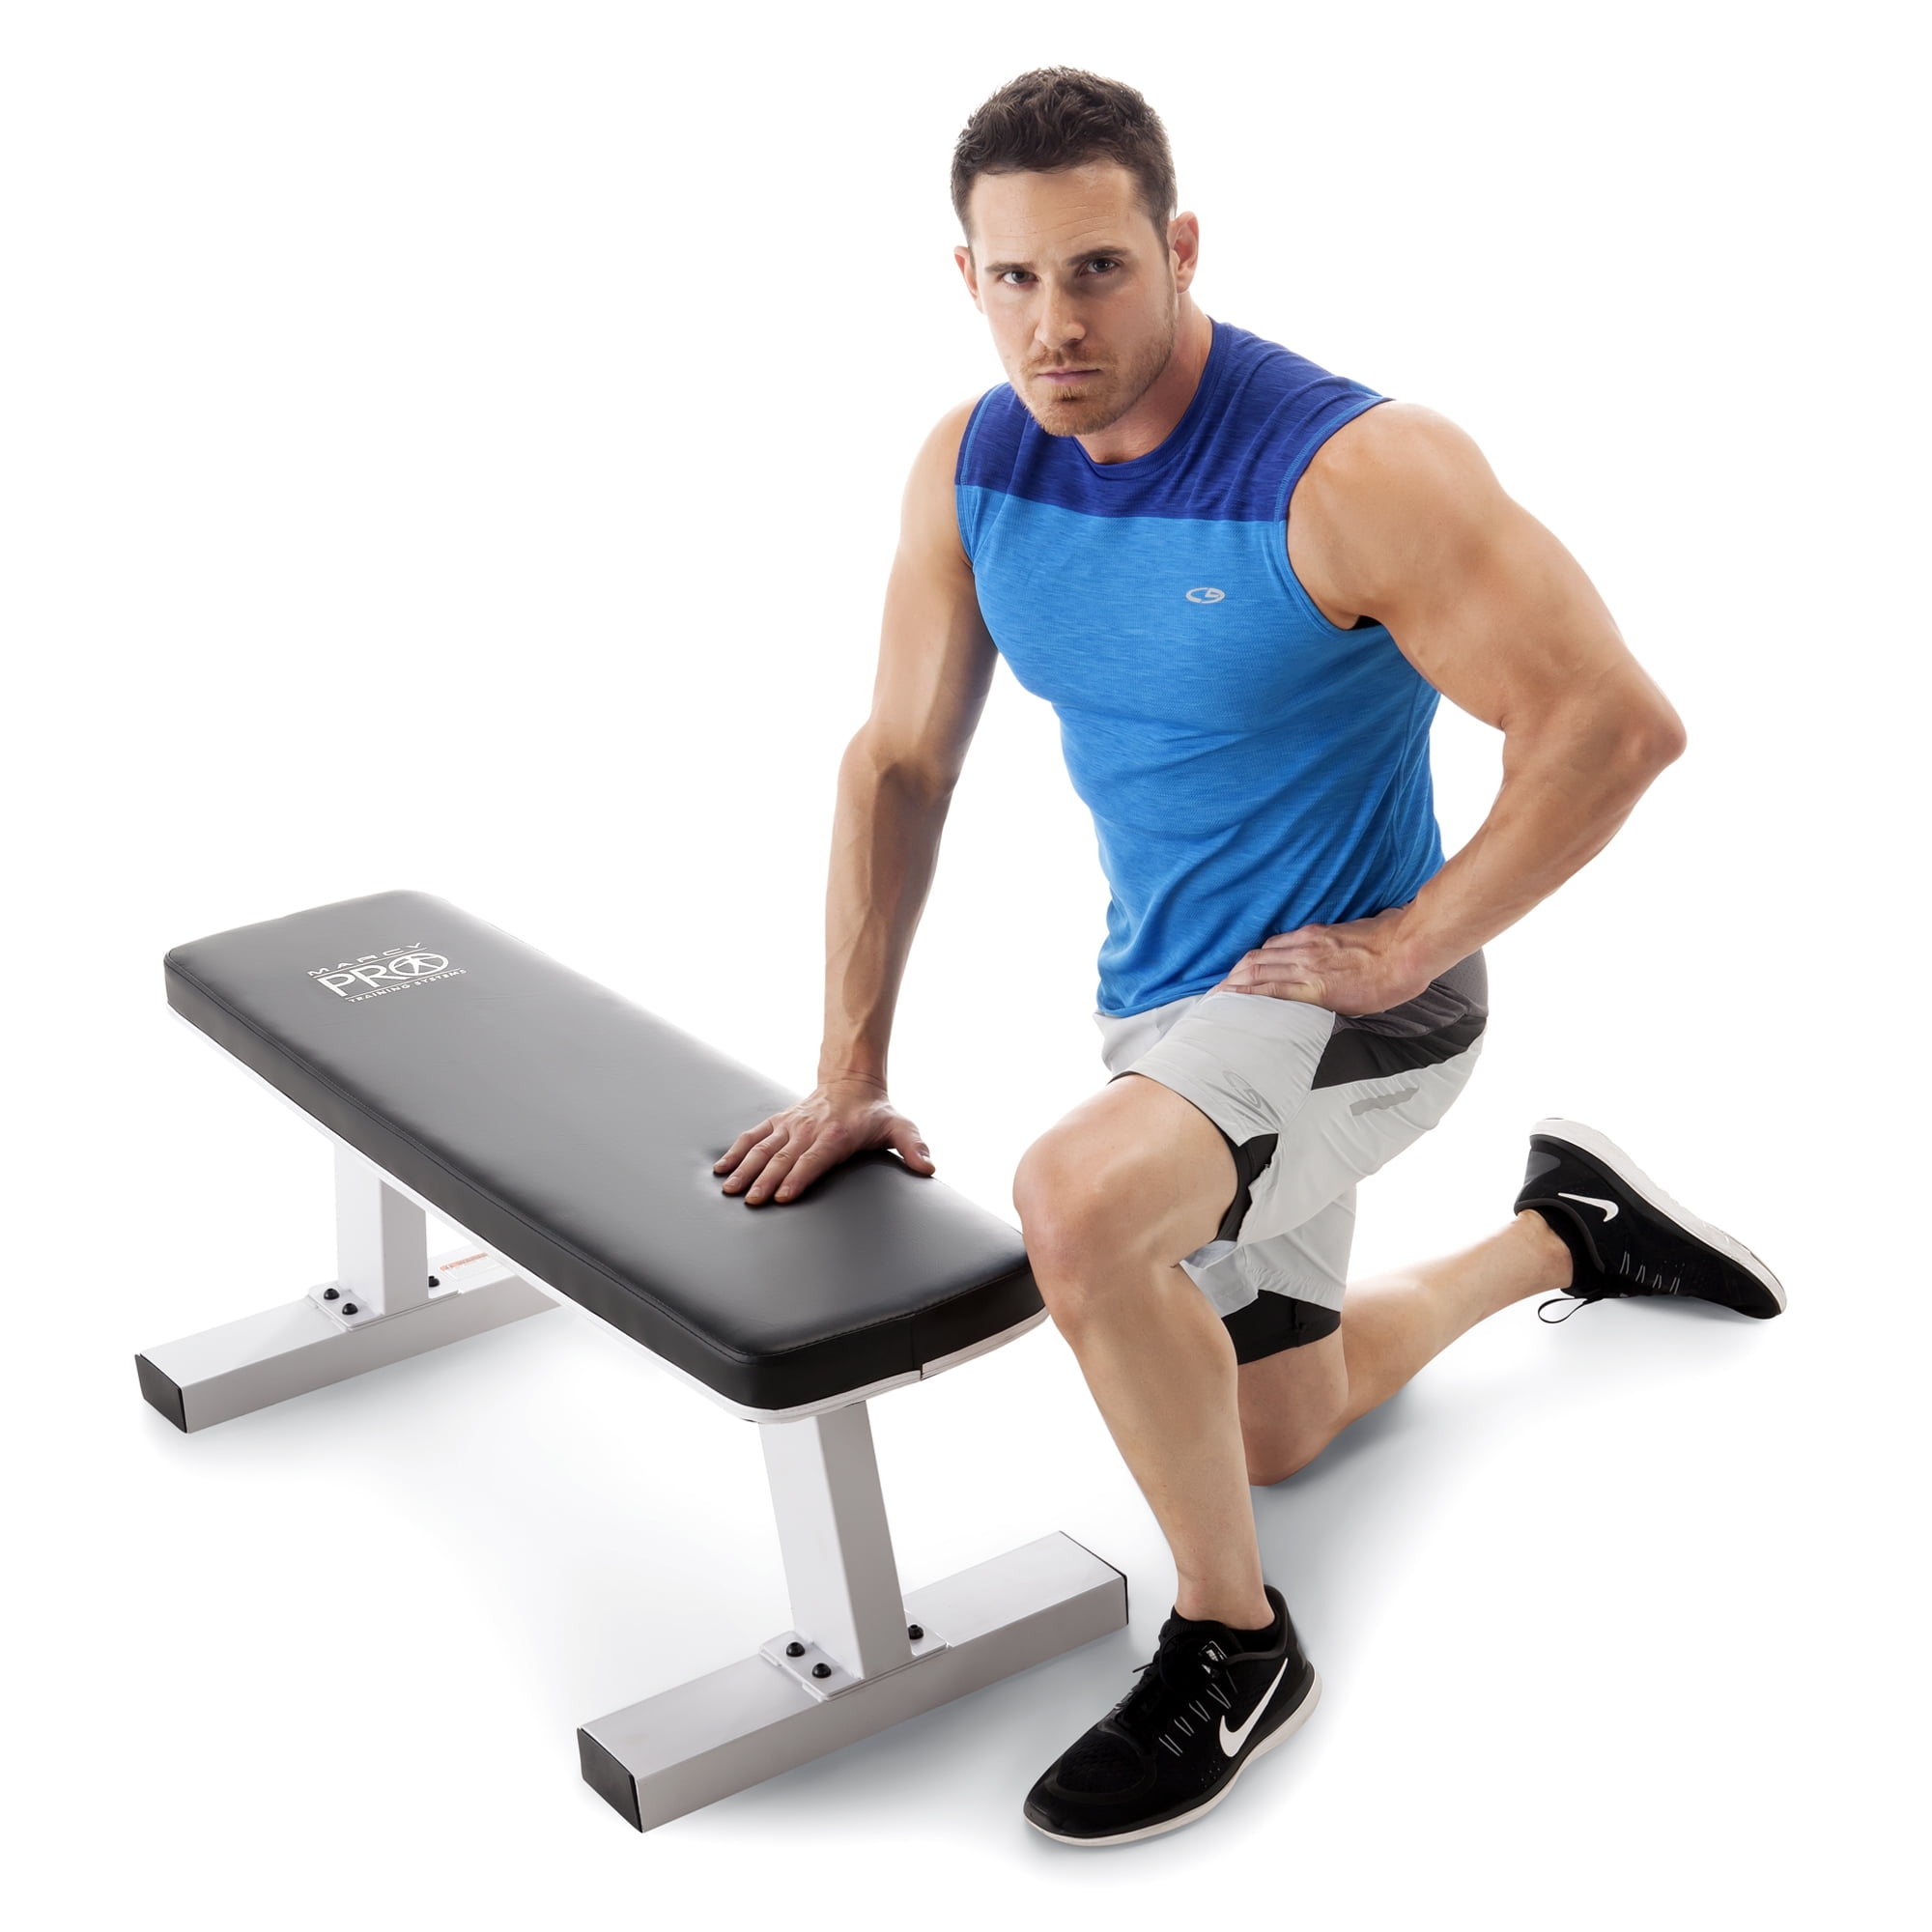 Marcy Utility Bench Workout Exercise Gym Fitness Weight Home Deluxe Training for sale online 